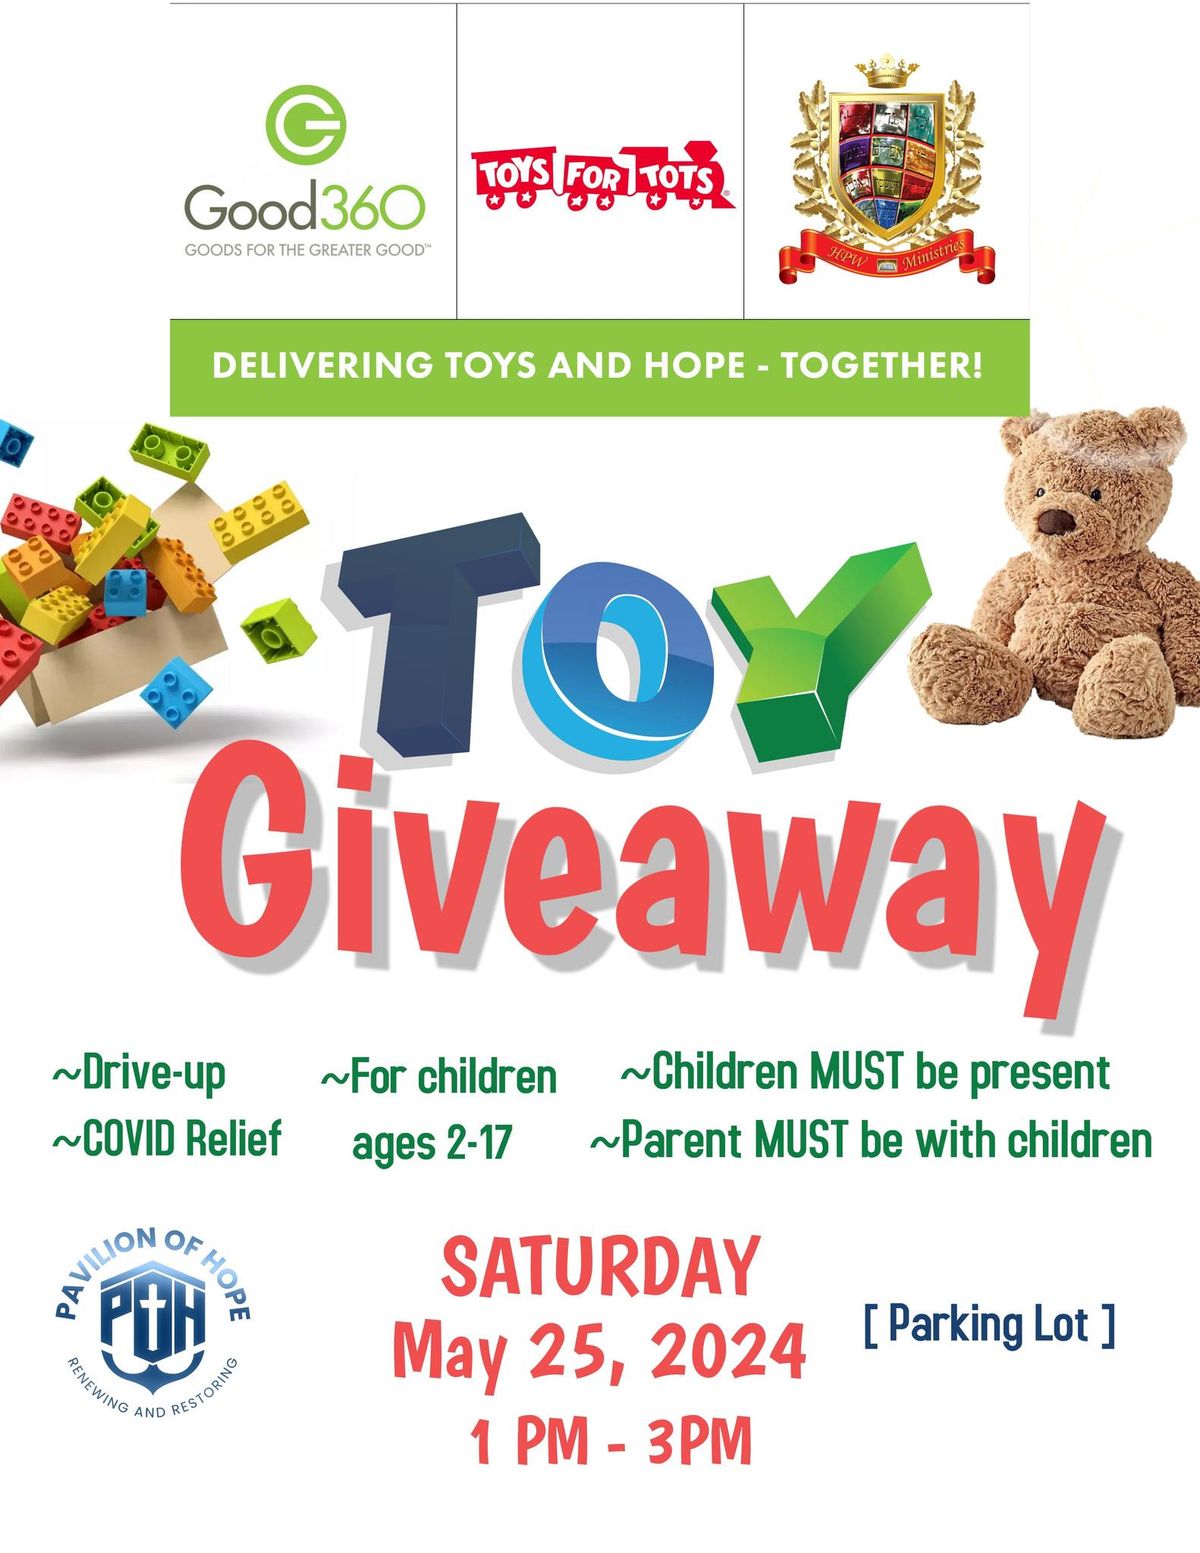 **MEMPHIS** FREE TOY GIVEAWAY